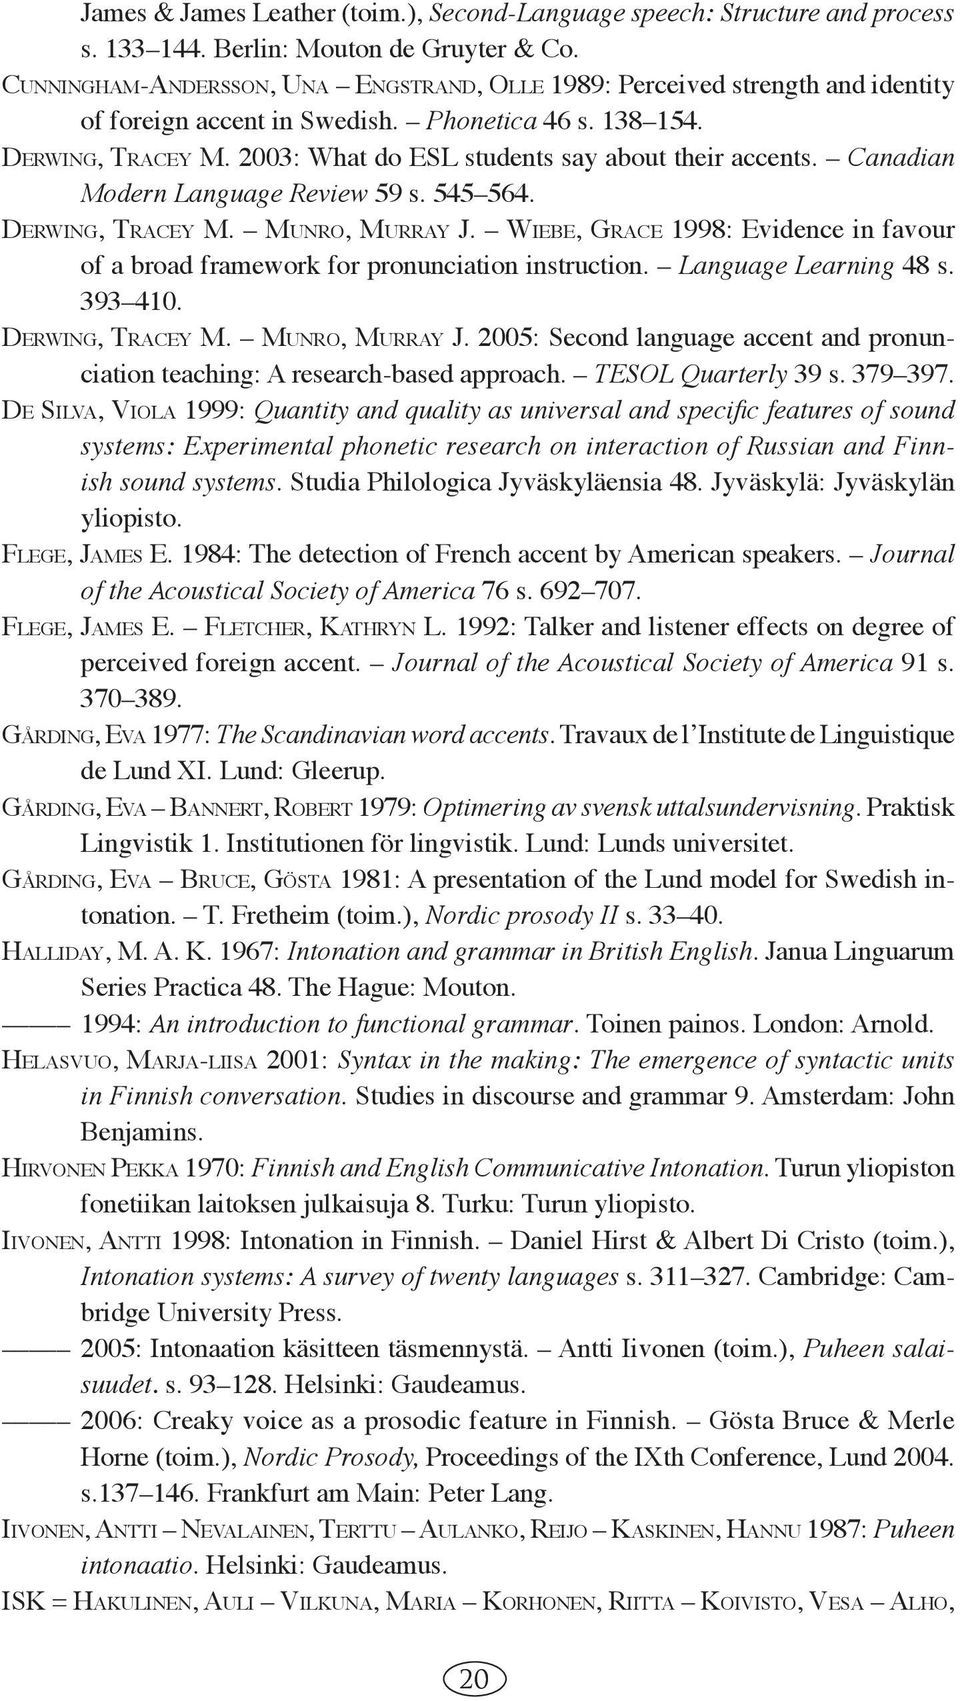 2003: What do ESL students say about their accents. Canadian Modern Language Review 59 s. 545 564. DERWING, TRACEY M. MUNRO, MURRAY J.